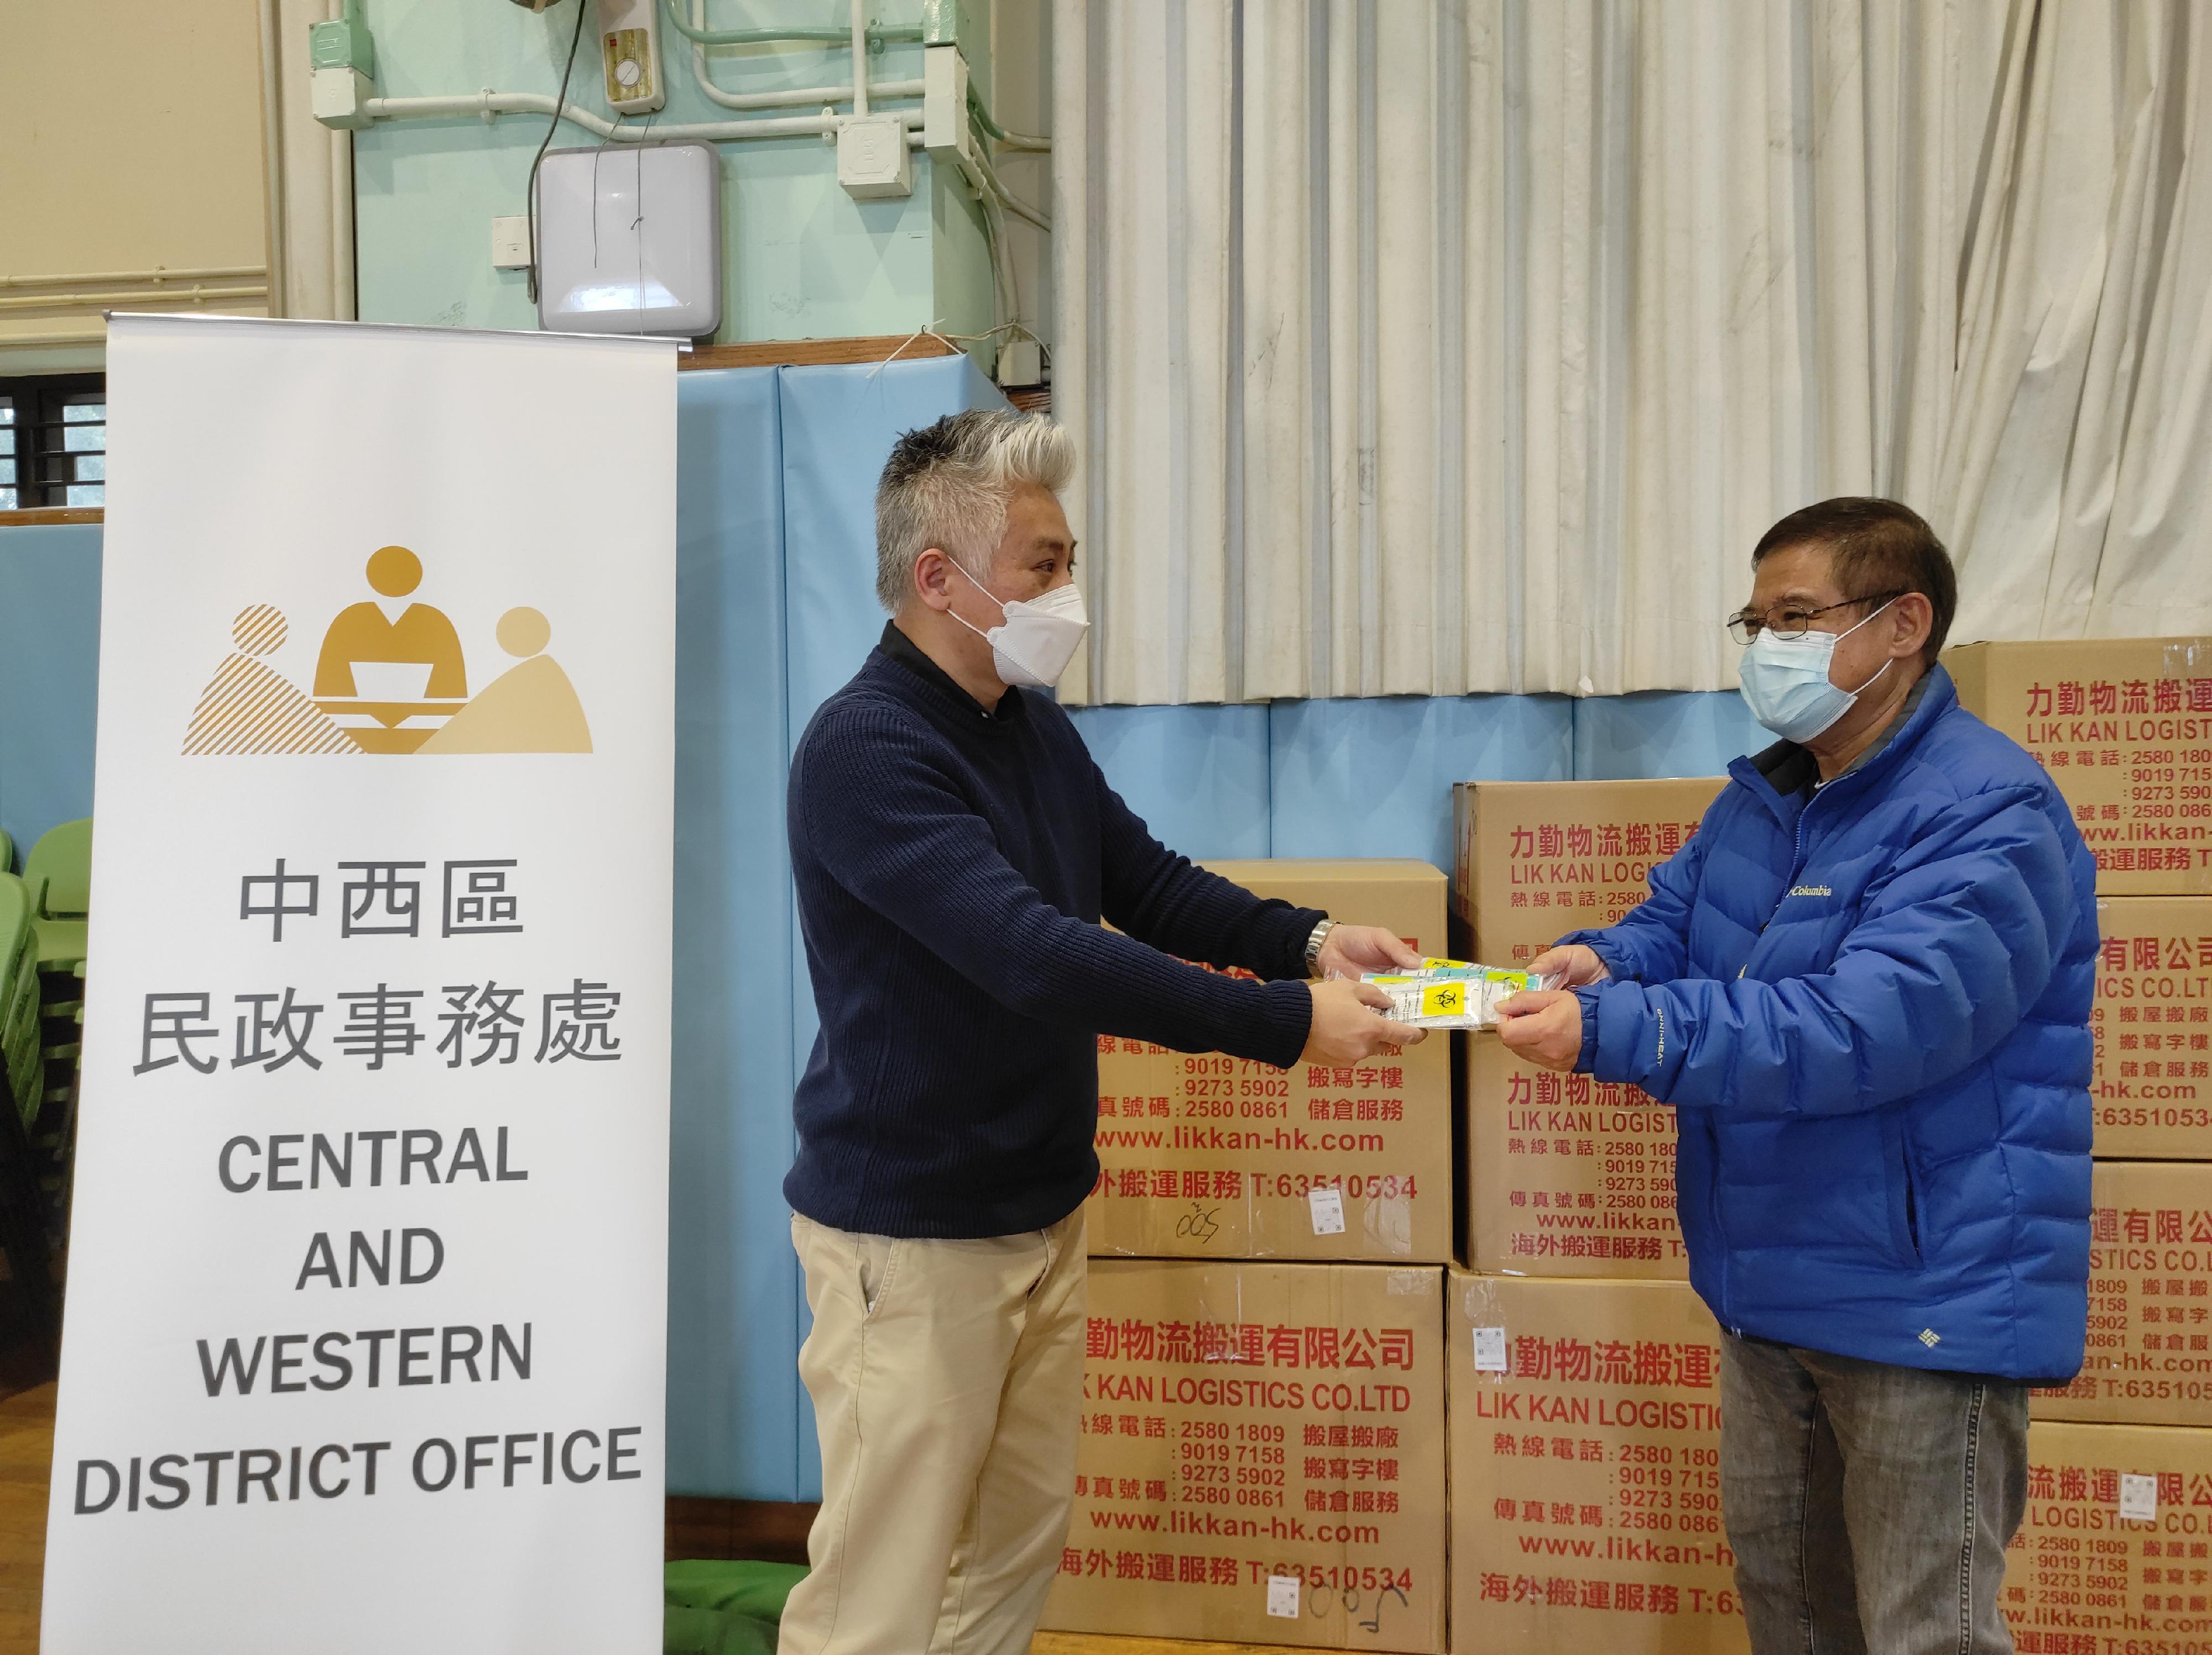 The Central and Western District Office today (February 6) distributed COVID-19 rapid test kits to cleansing workers and property management staff for voluntary testing through the property management companies in the district.